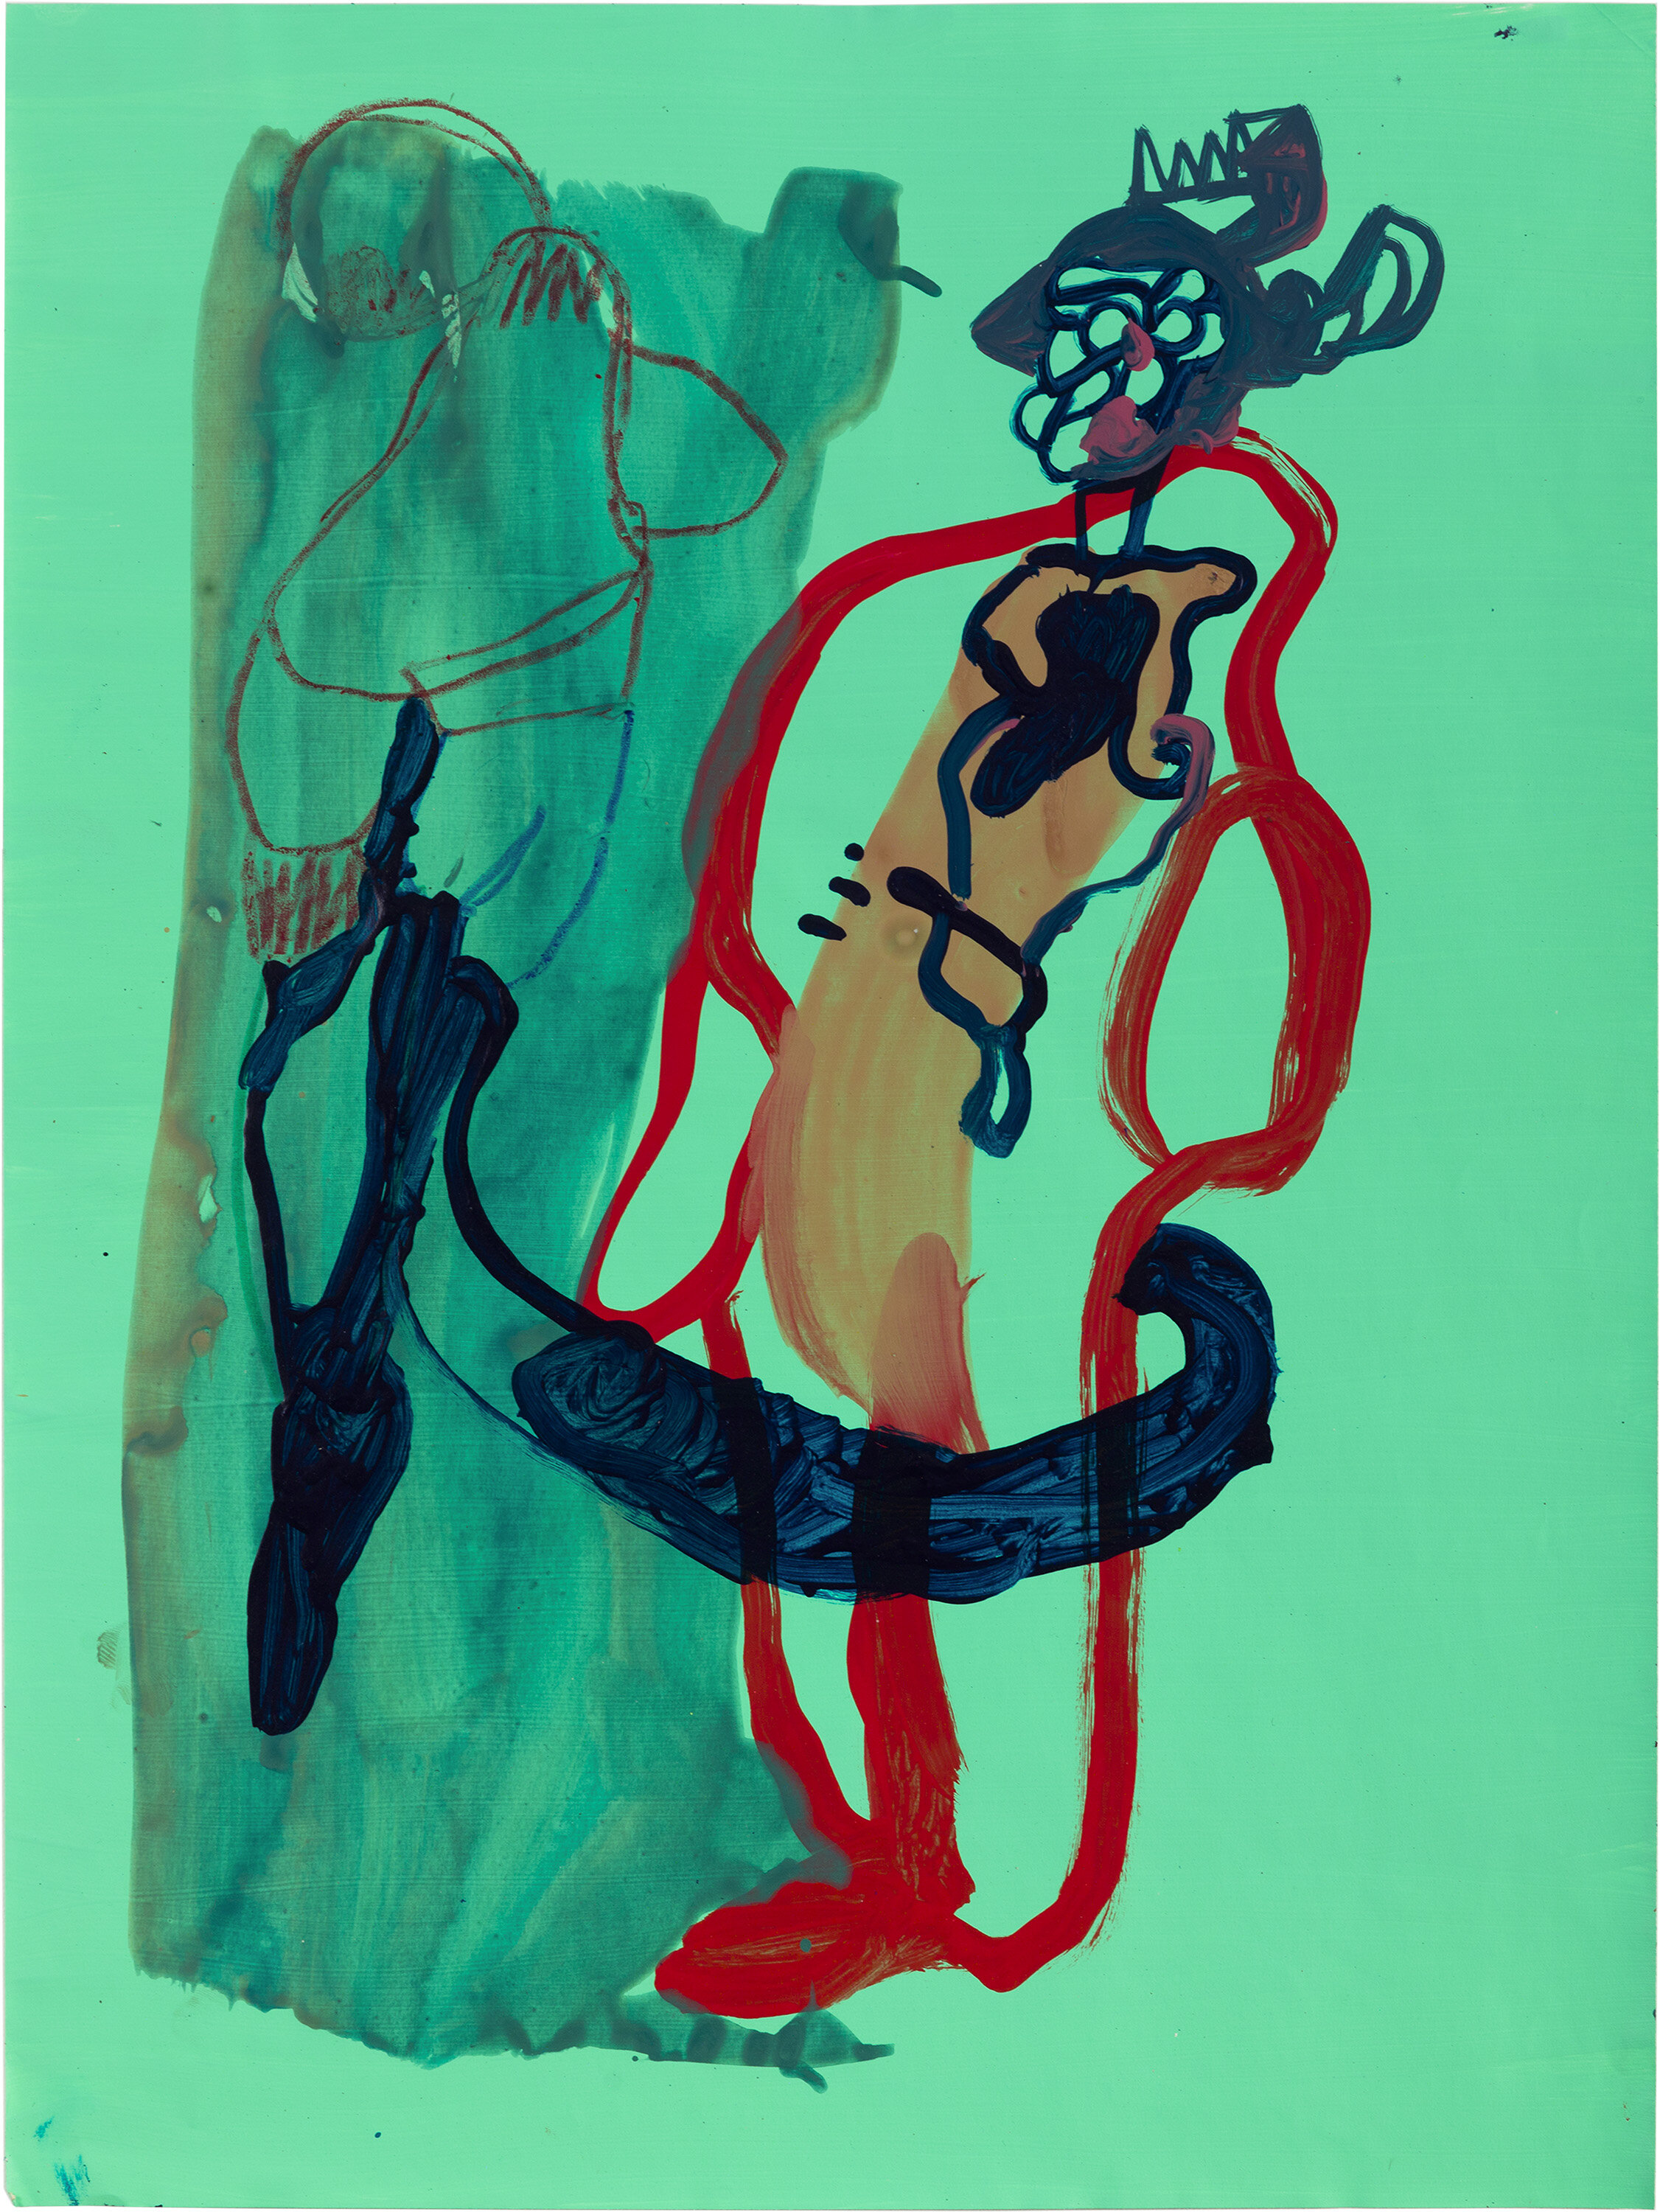  Drew Beattie and Ben Shepard   DBBS-DRW-2015-054   2015  acrylic and oil stick on paper  24 x 18 inches 